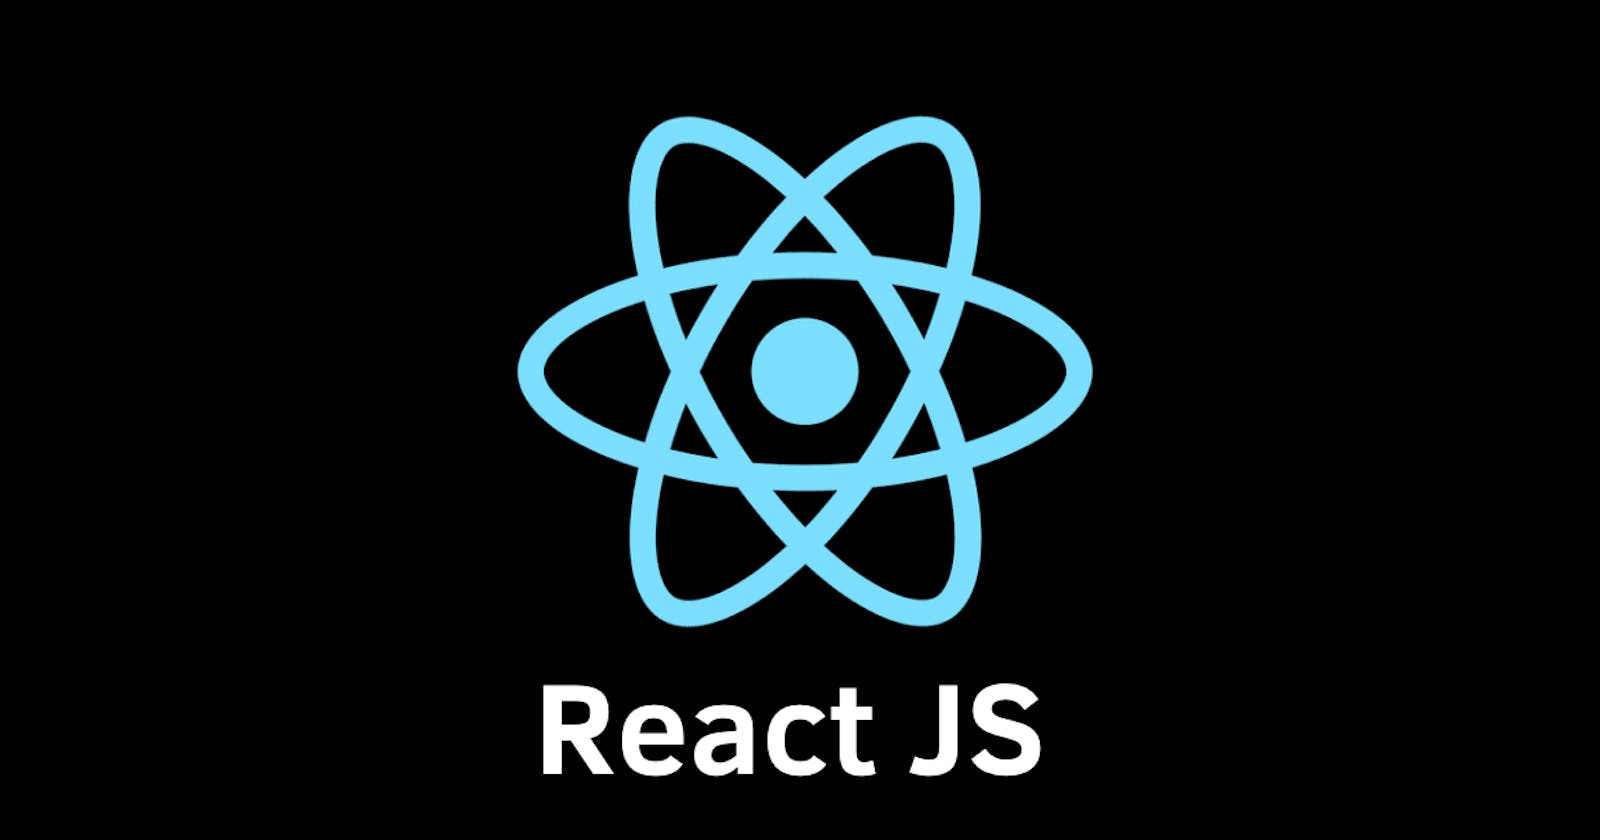 Some Important concepts while using React 
#Learnings-1